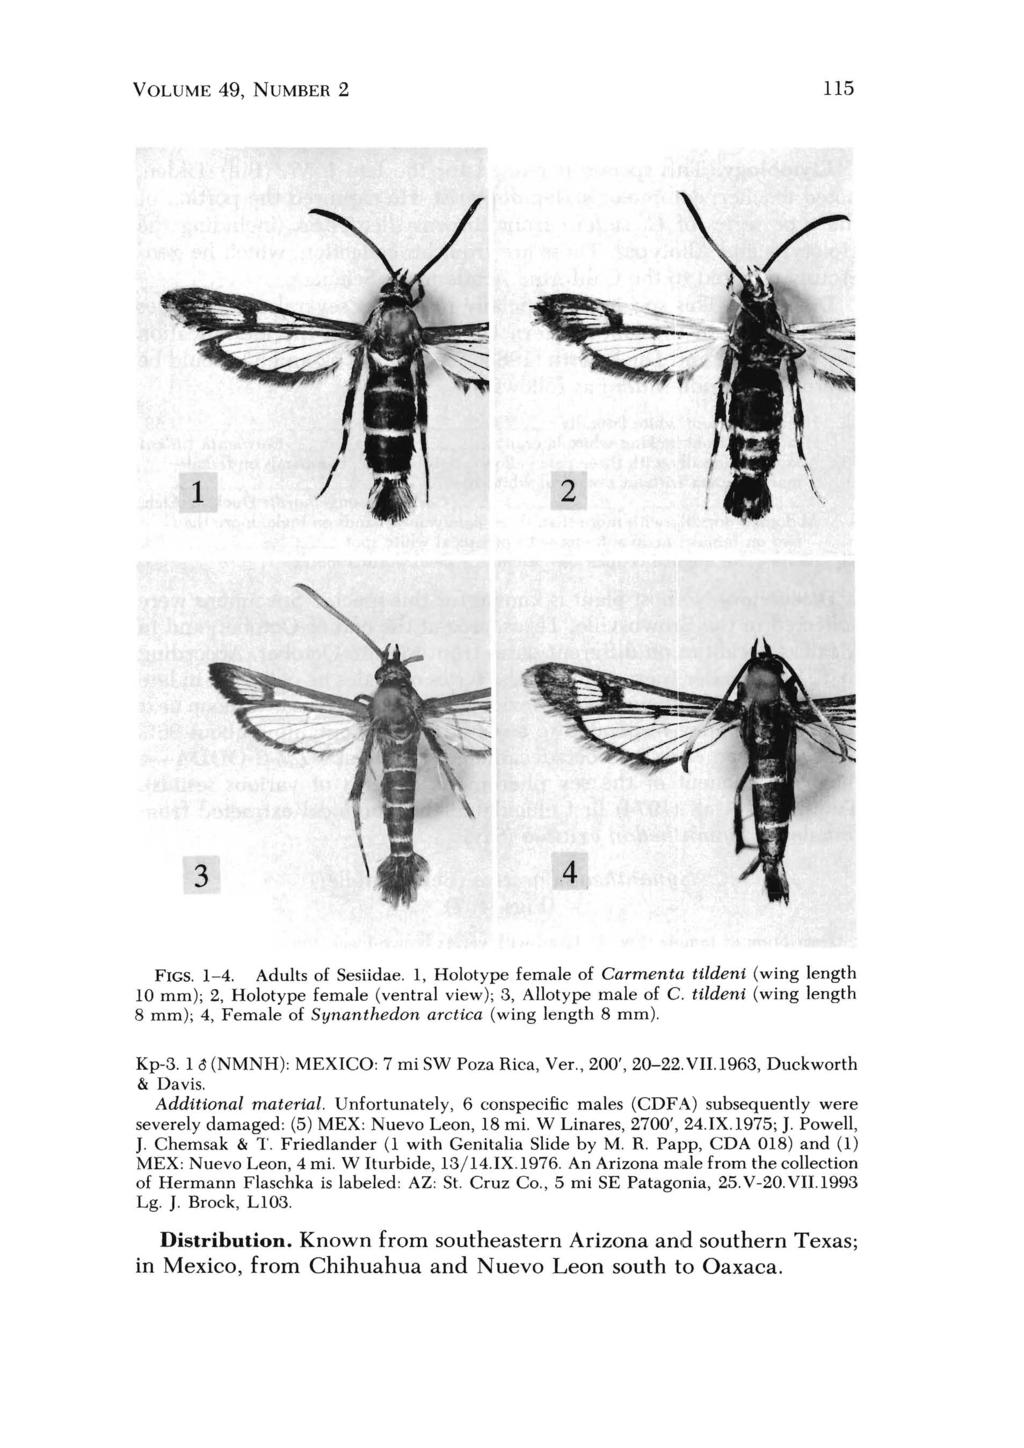 VOLUME 49, NUMBER 2 115 FIGS, 1-4, Adults of Sesiidae, 1, Holotype female of Carment! tildeni (wing length 10 mm); 2, Holotype female (ventral view); 3, Allotype male of C.